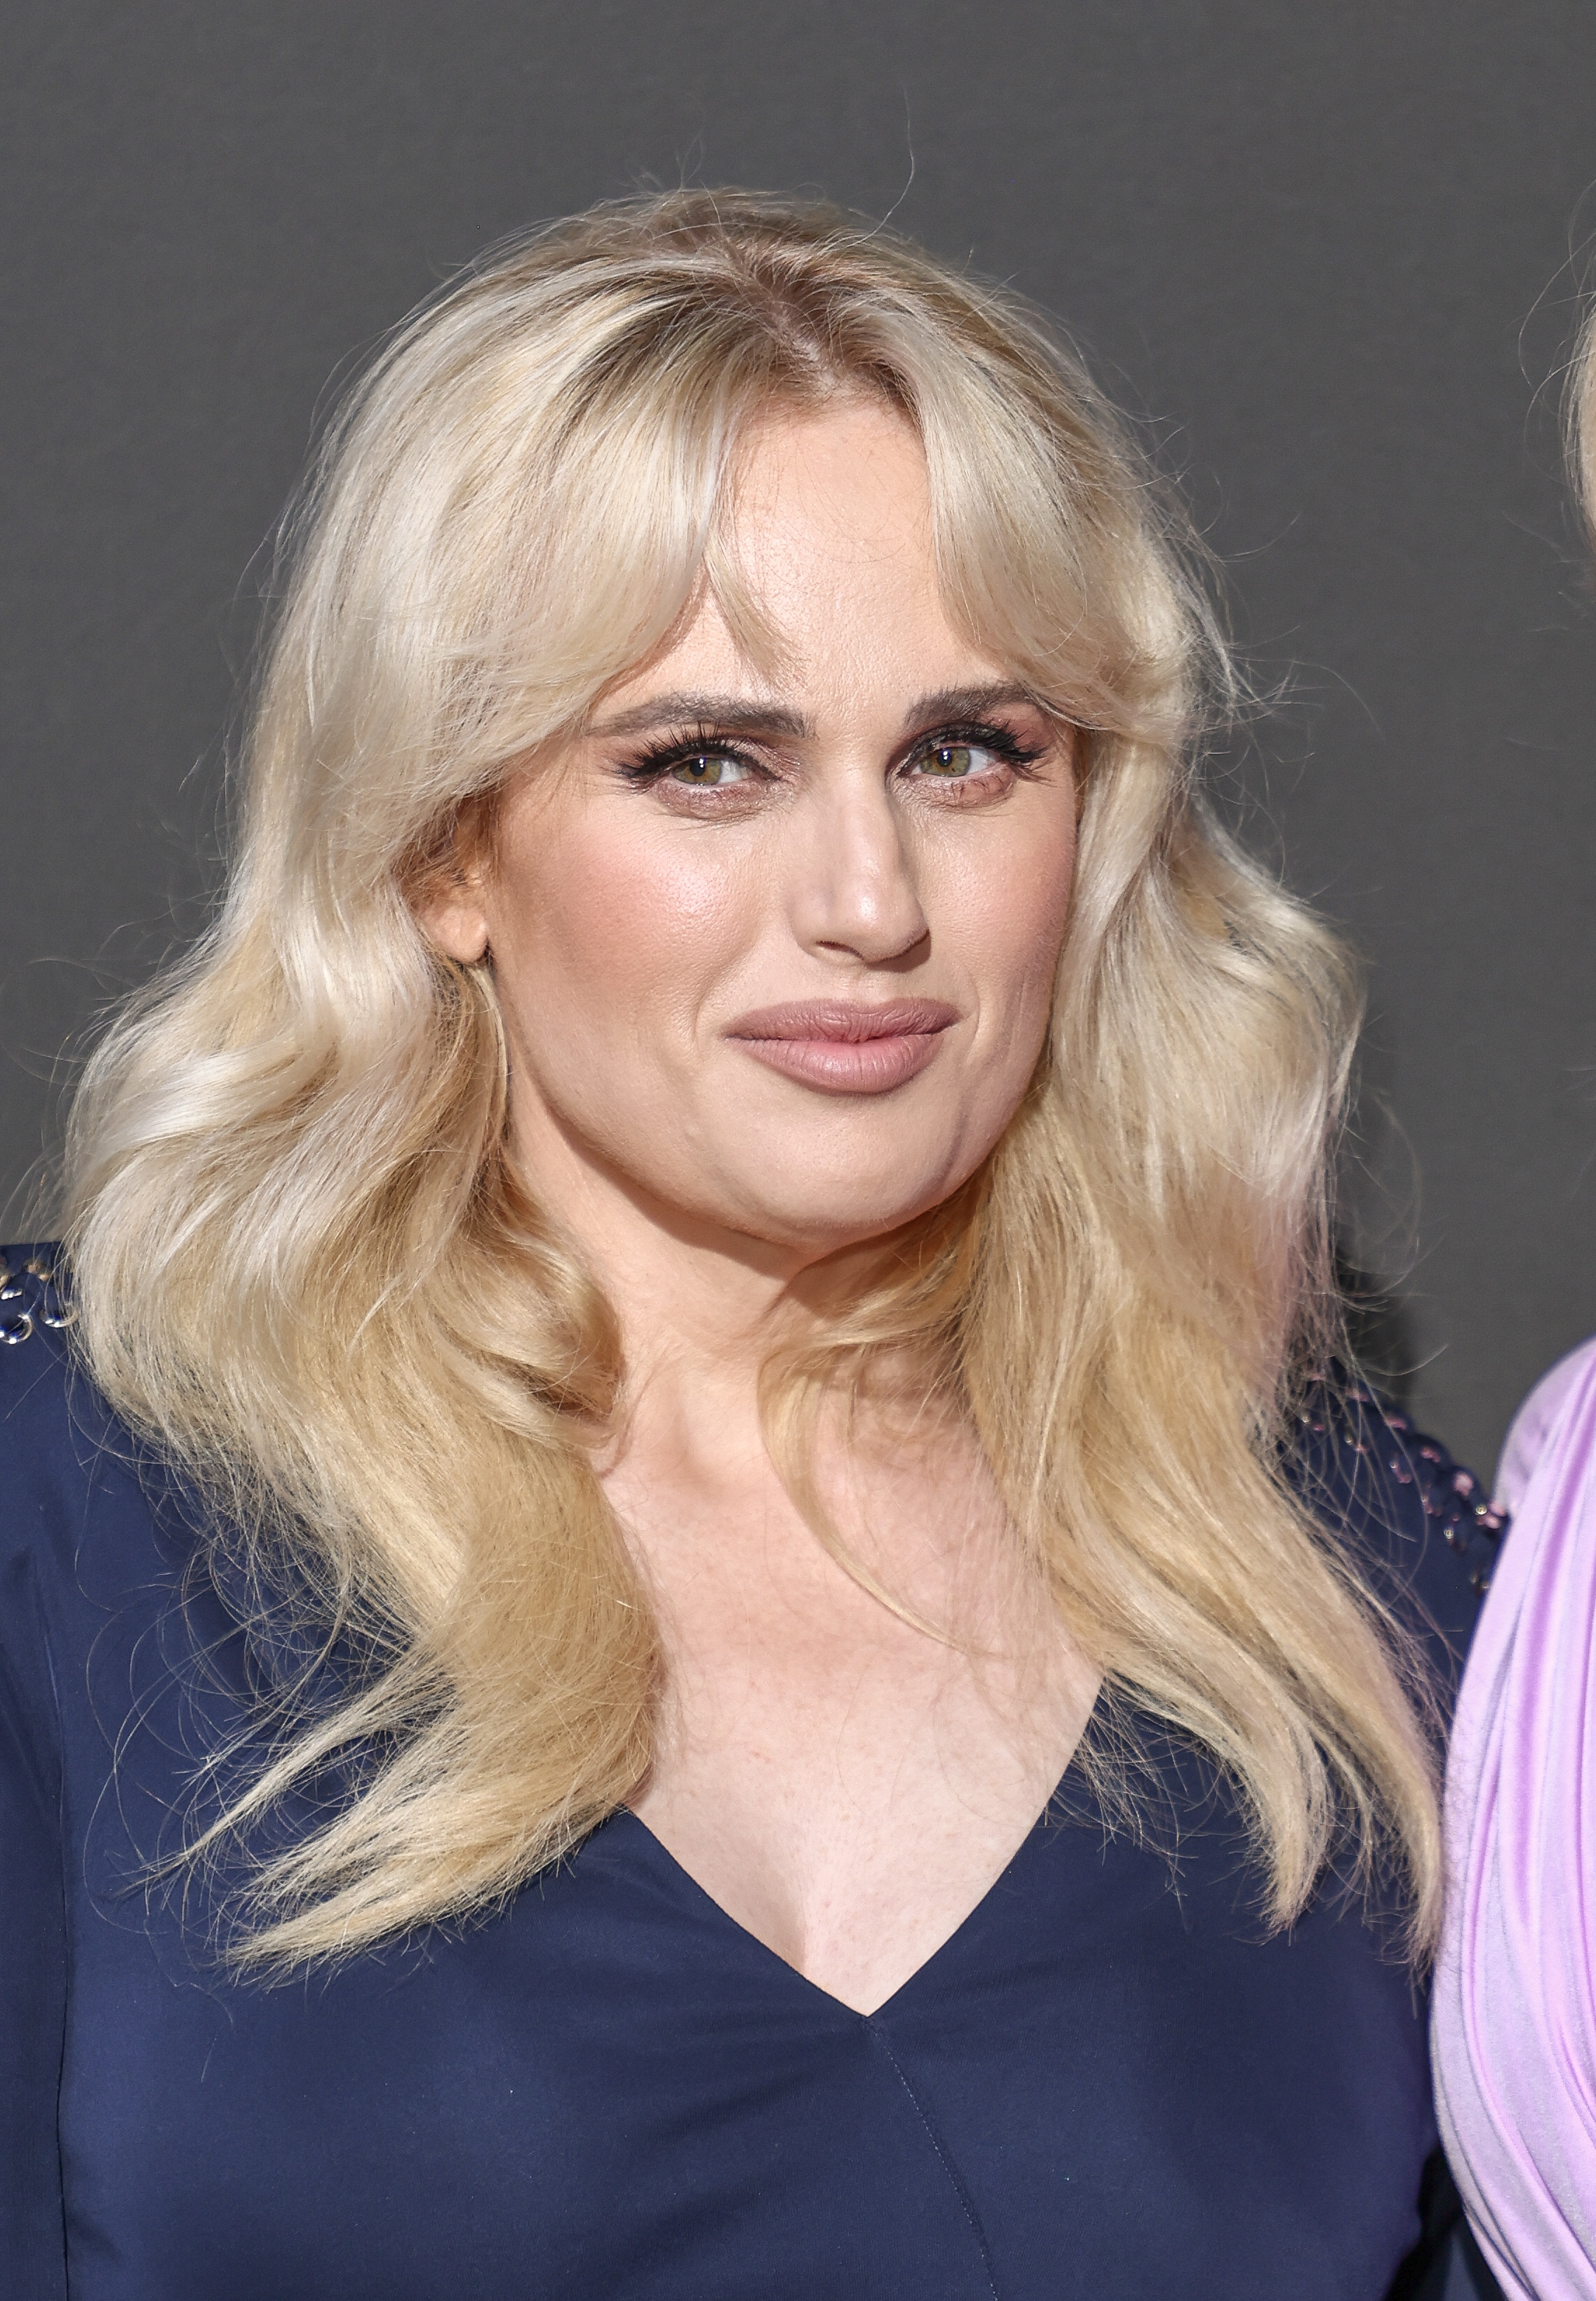 Close-up of Rebel Wilson with wavy hair, smiling, wearing a navy dress with details at the top